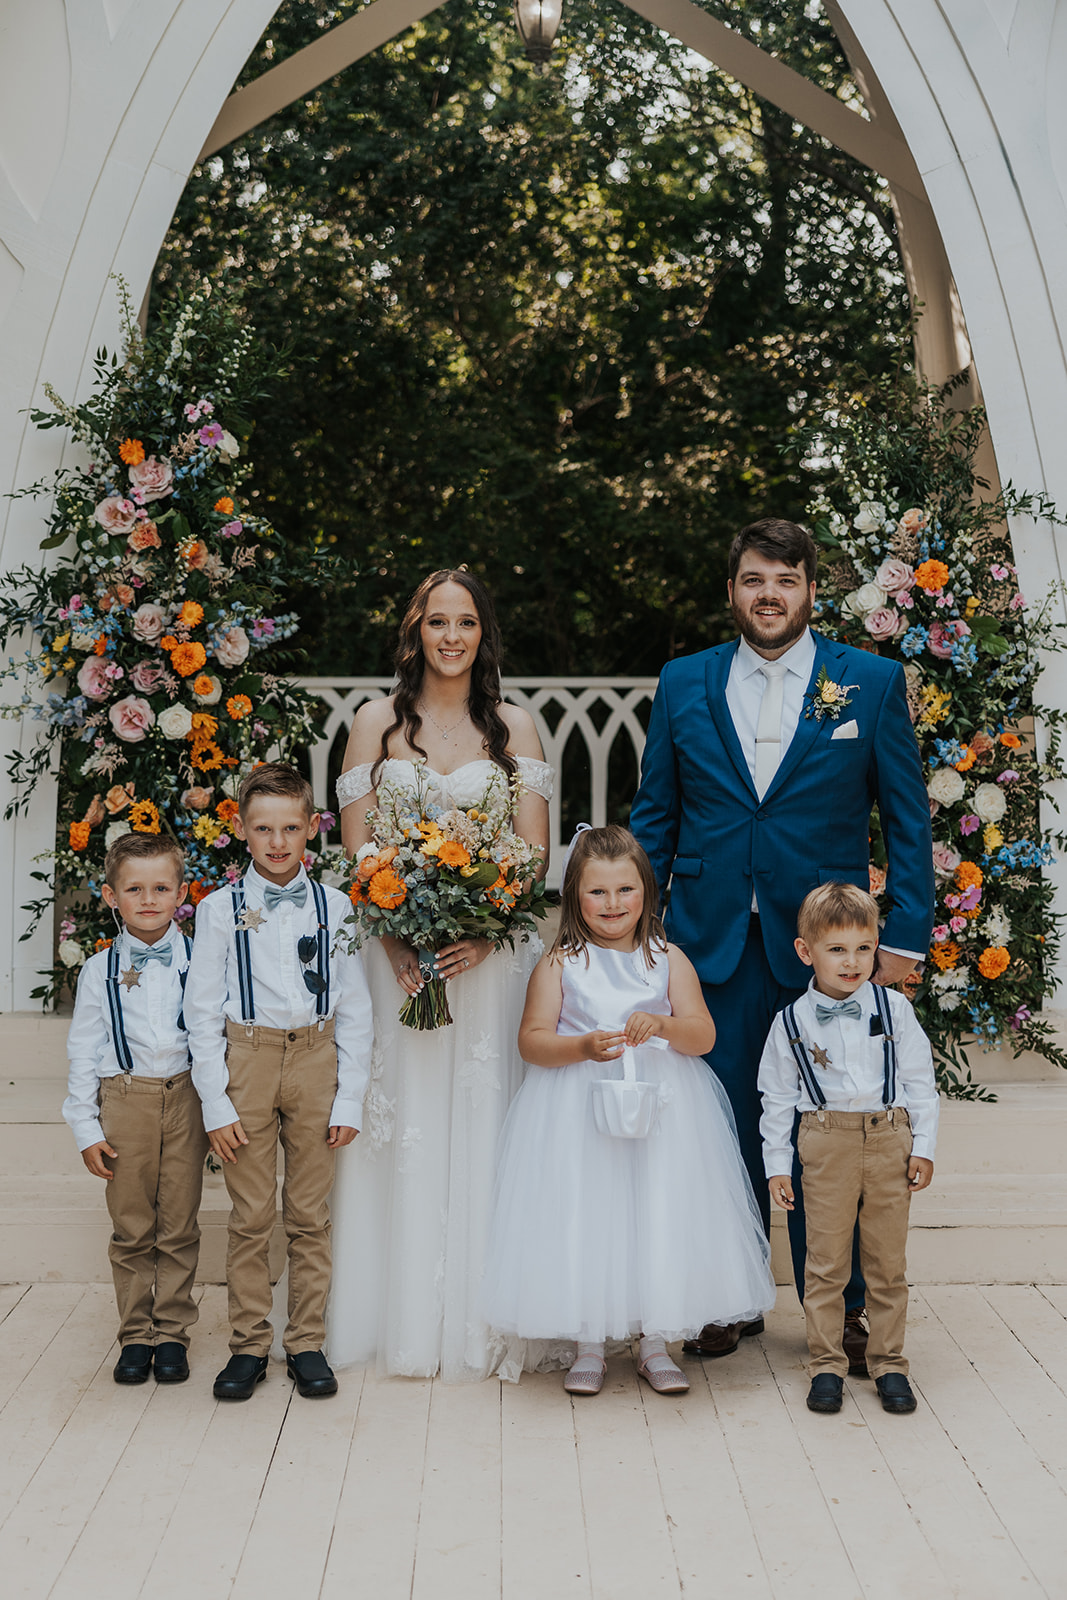 the bride and groom pose with kids